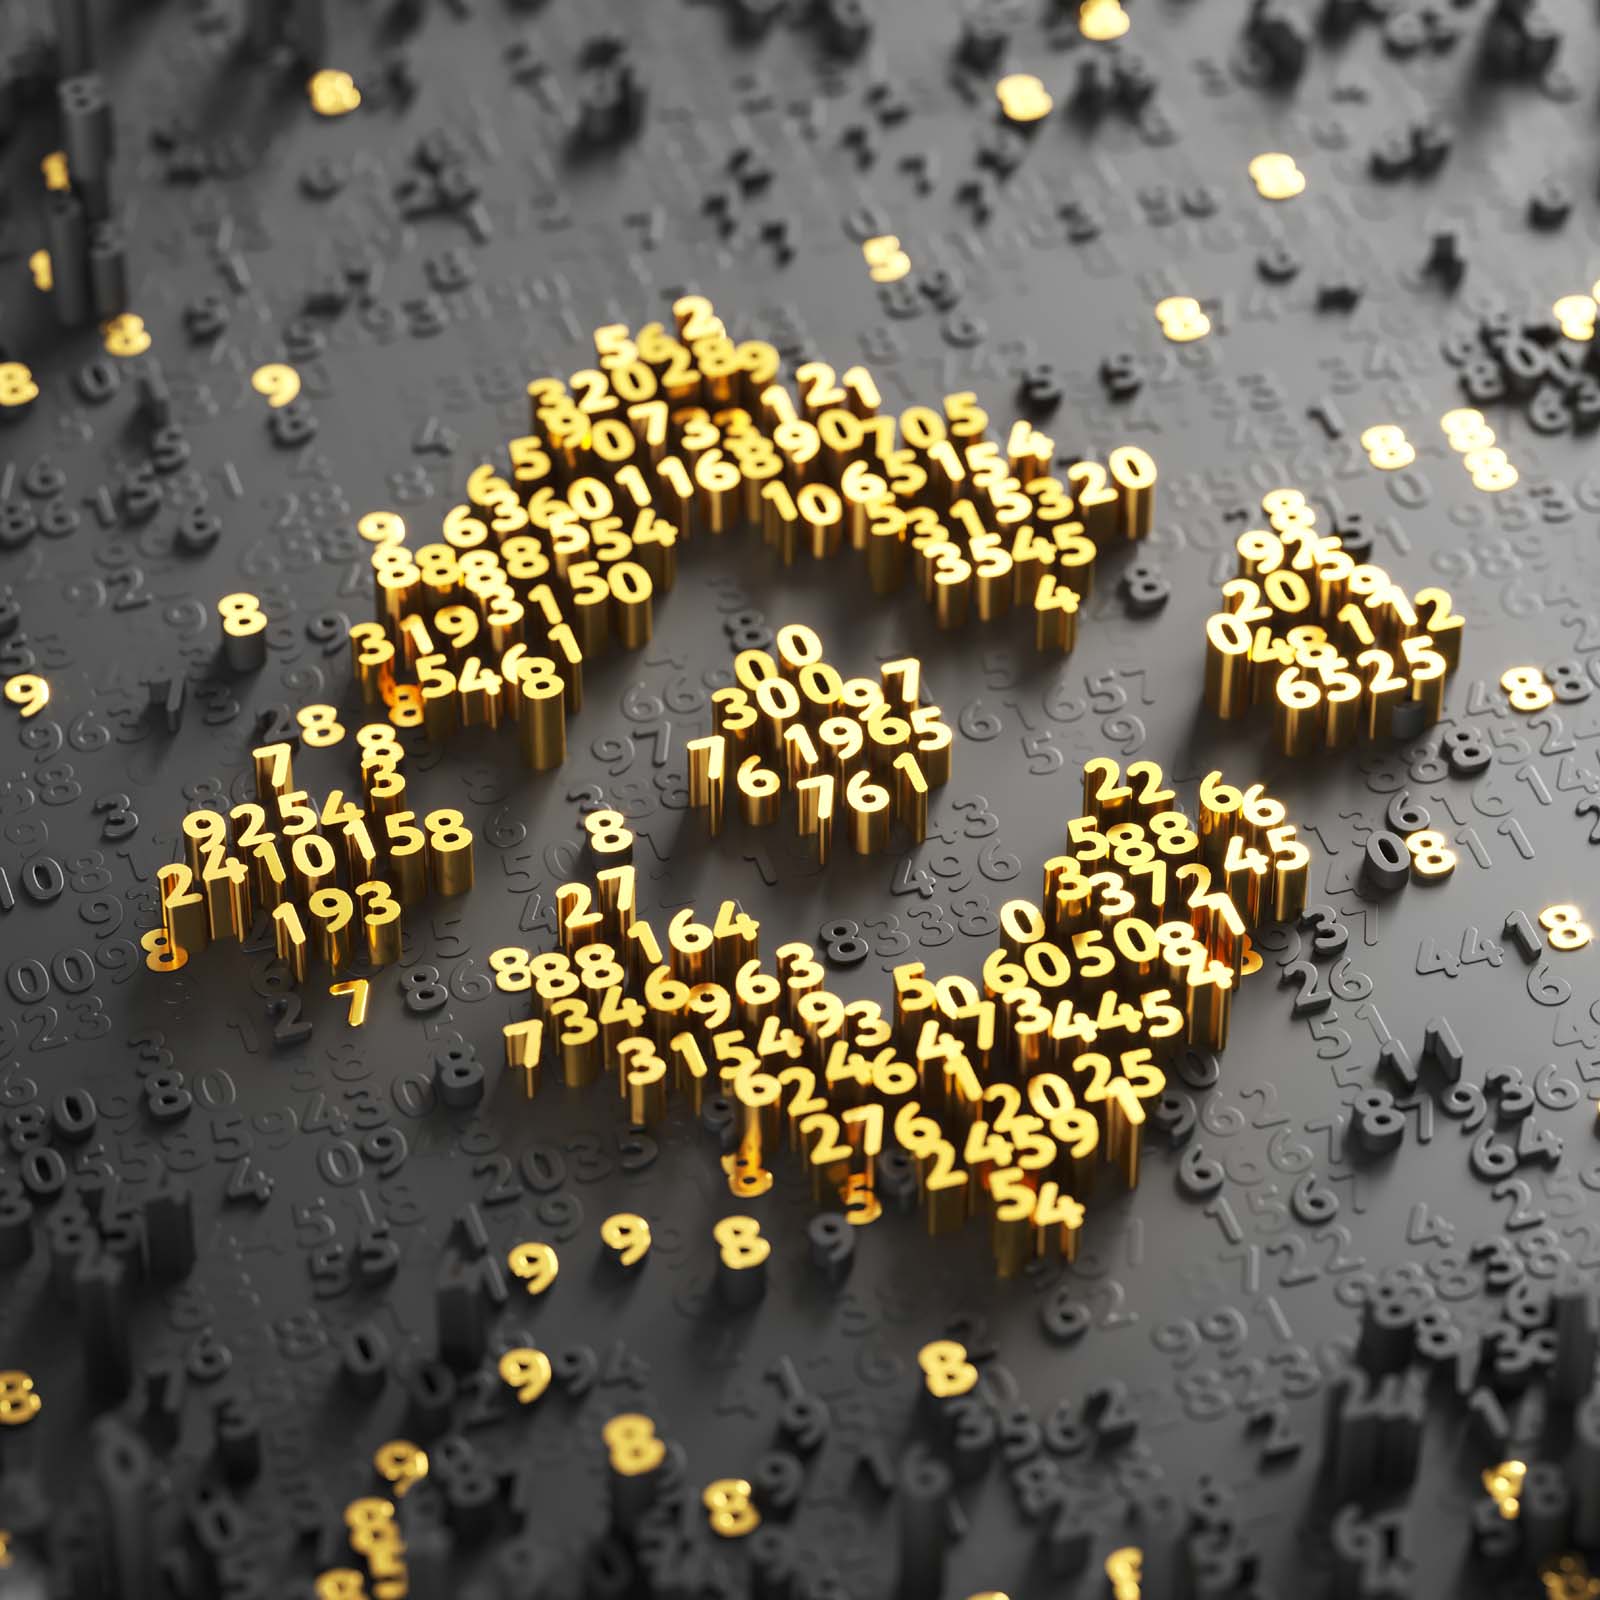 Crypto Exchange Binance Expects up to $1 Billion Profit in 2018